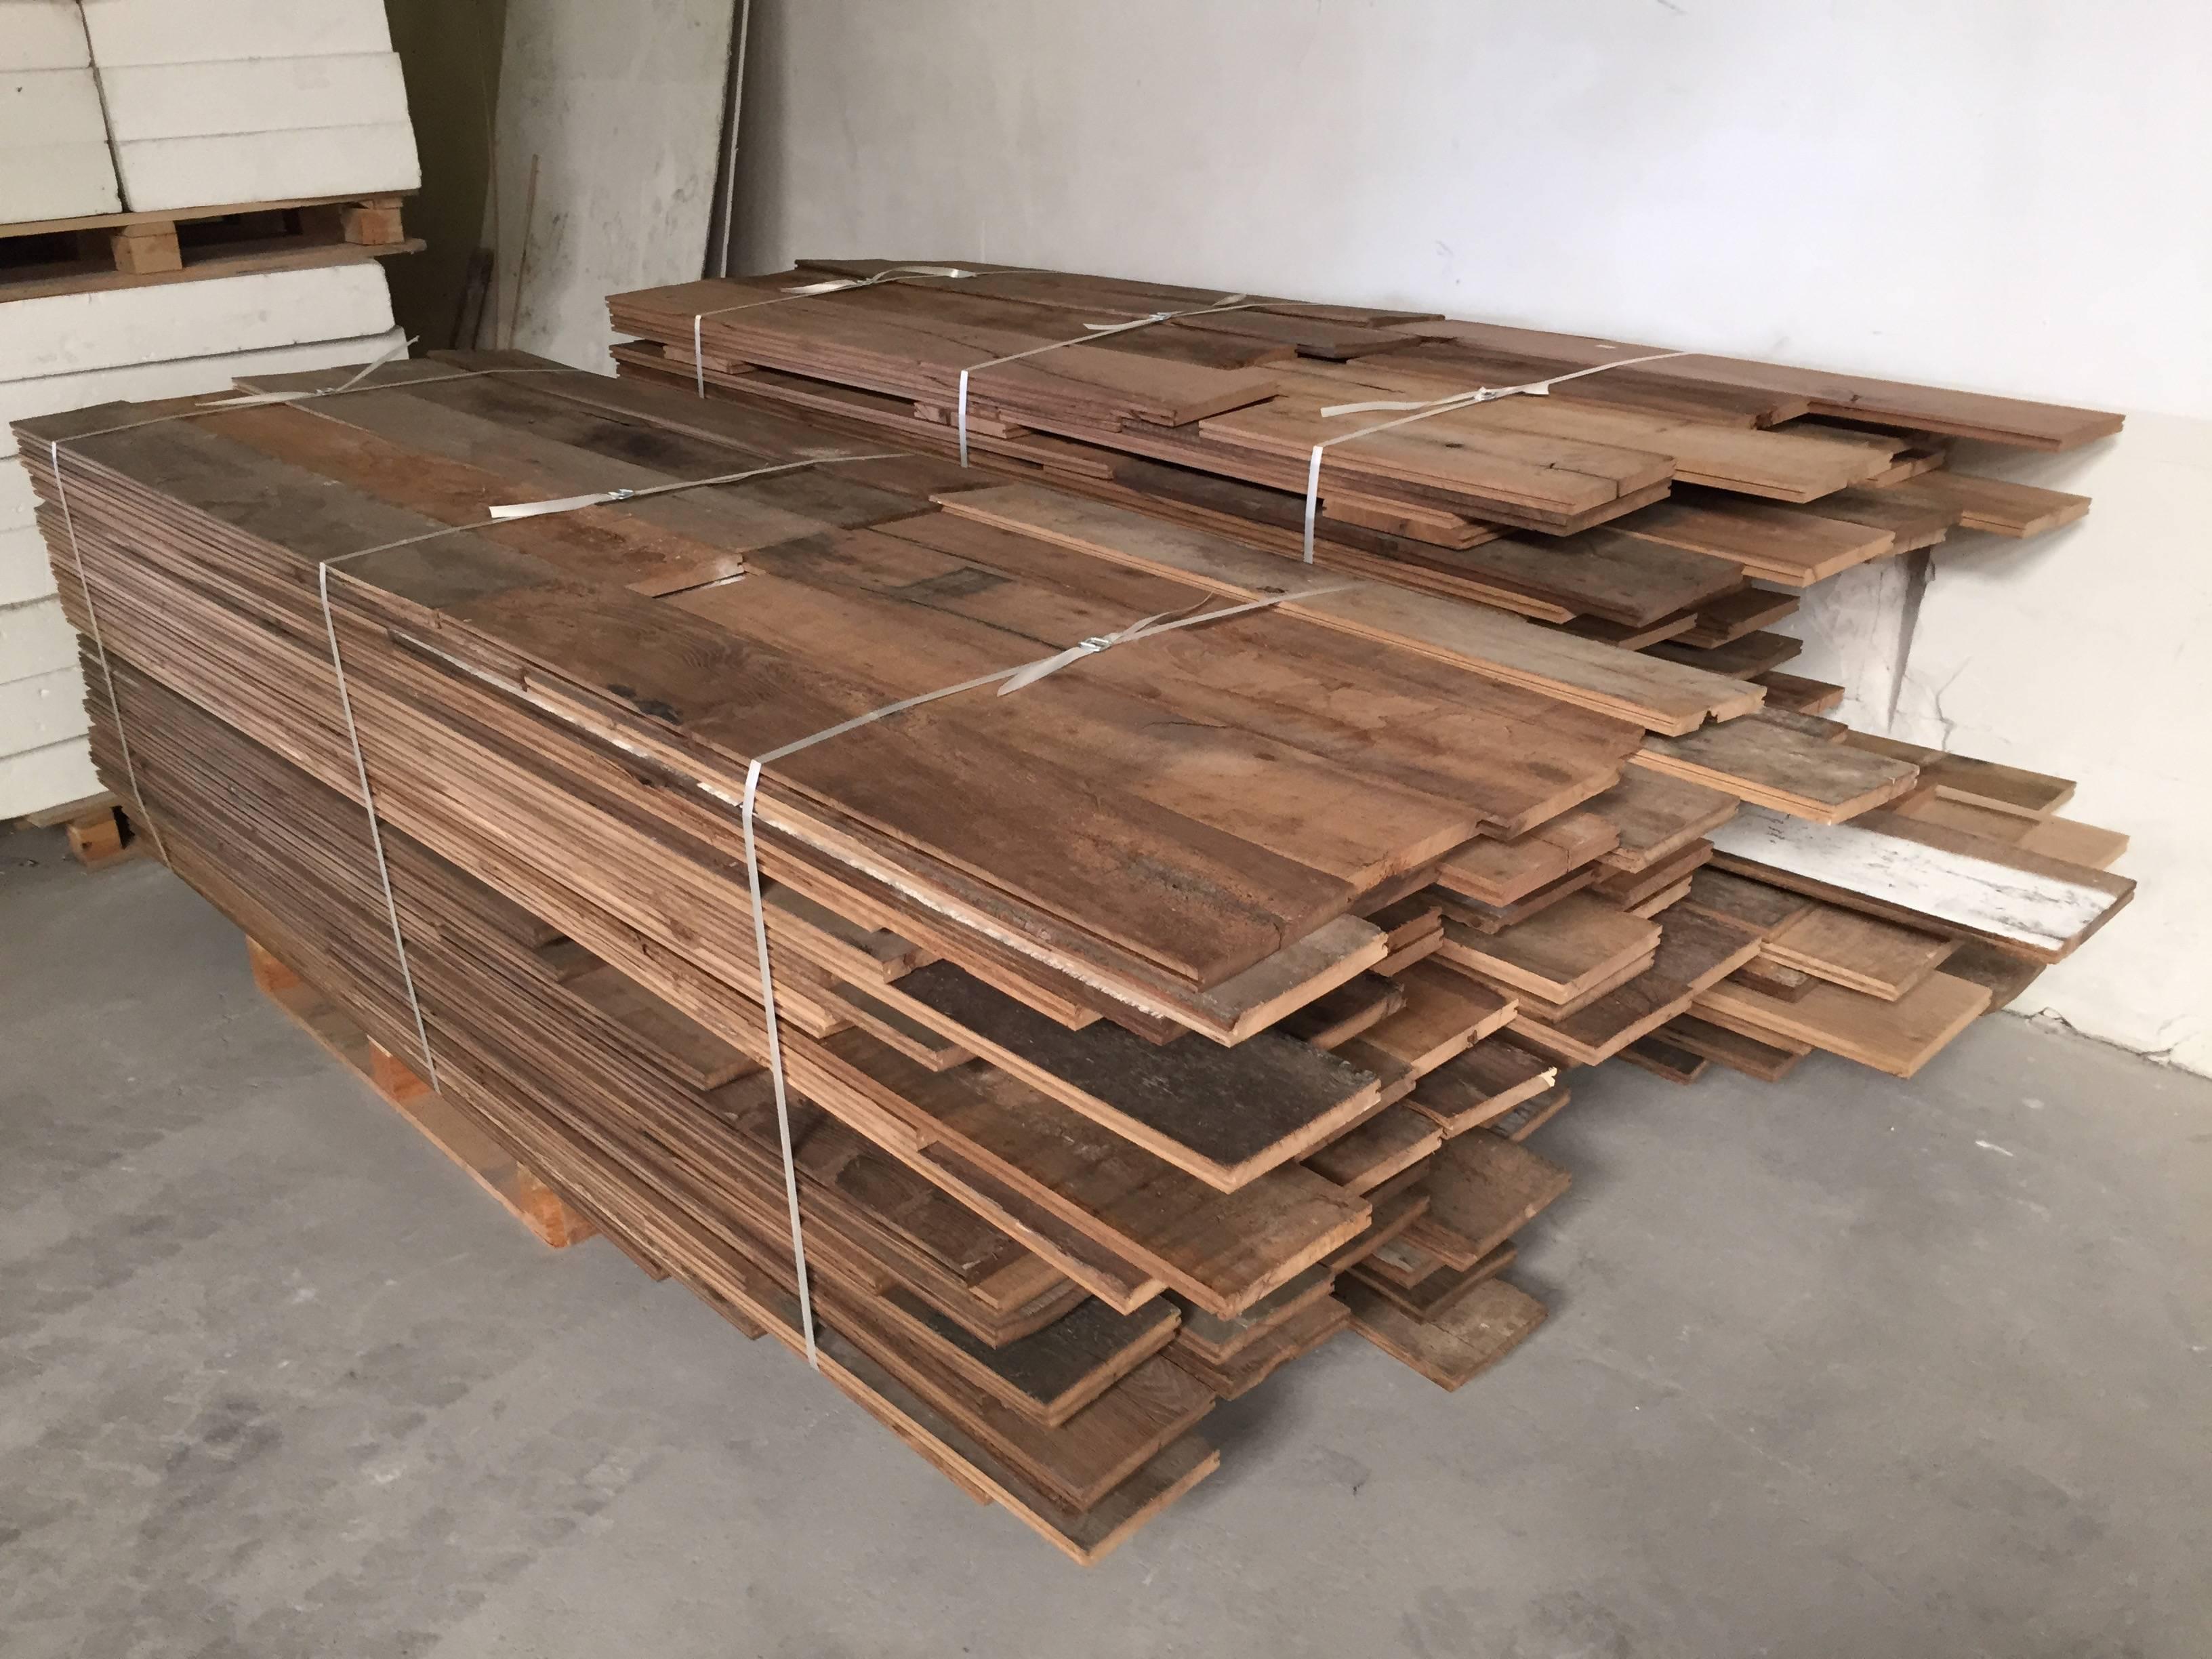 Rare set of 3,500 square feet of authentic original French antique wood oak floors from the 18th century.
All planks have been reworked 8 to 10 times by hands.
They are all ready for installation.
Width from 5 inches to 14 inches, long length.
Top